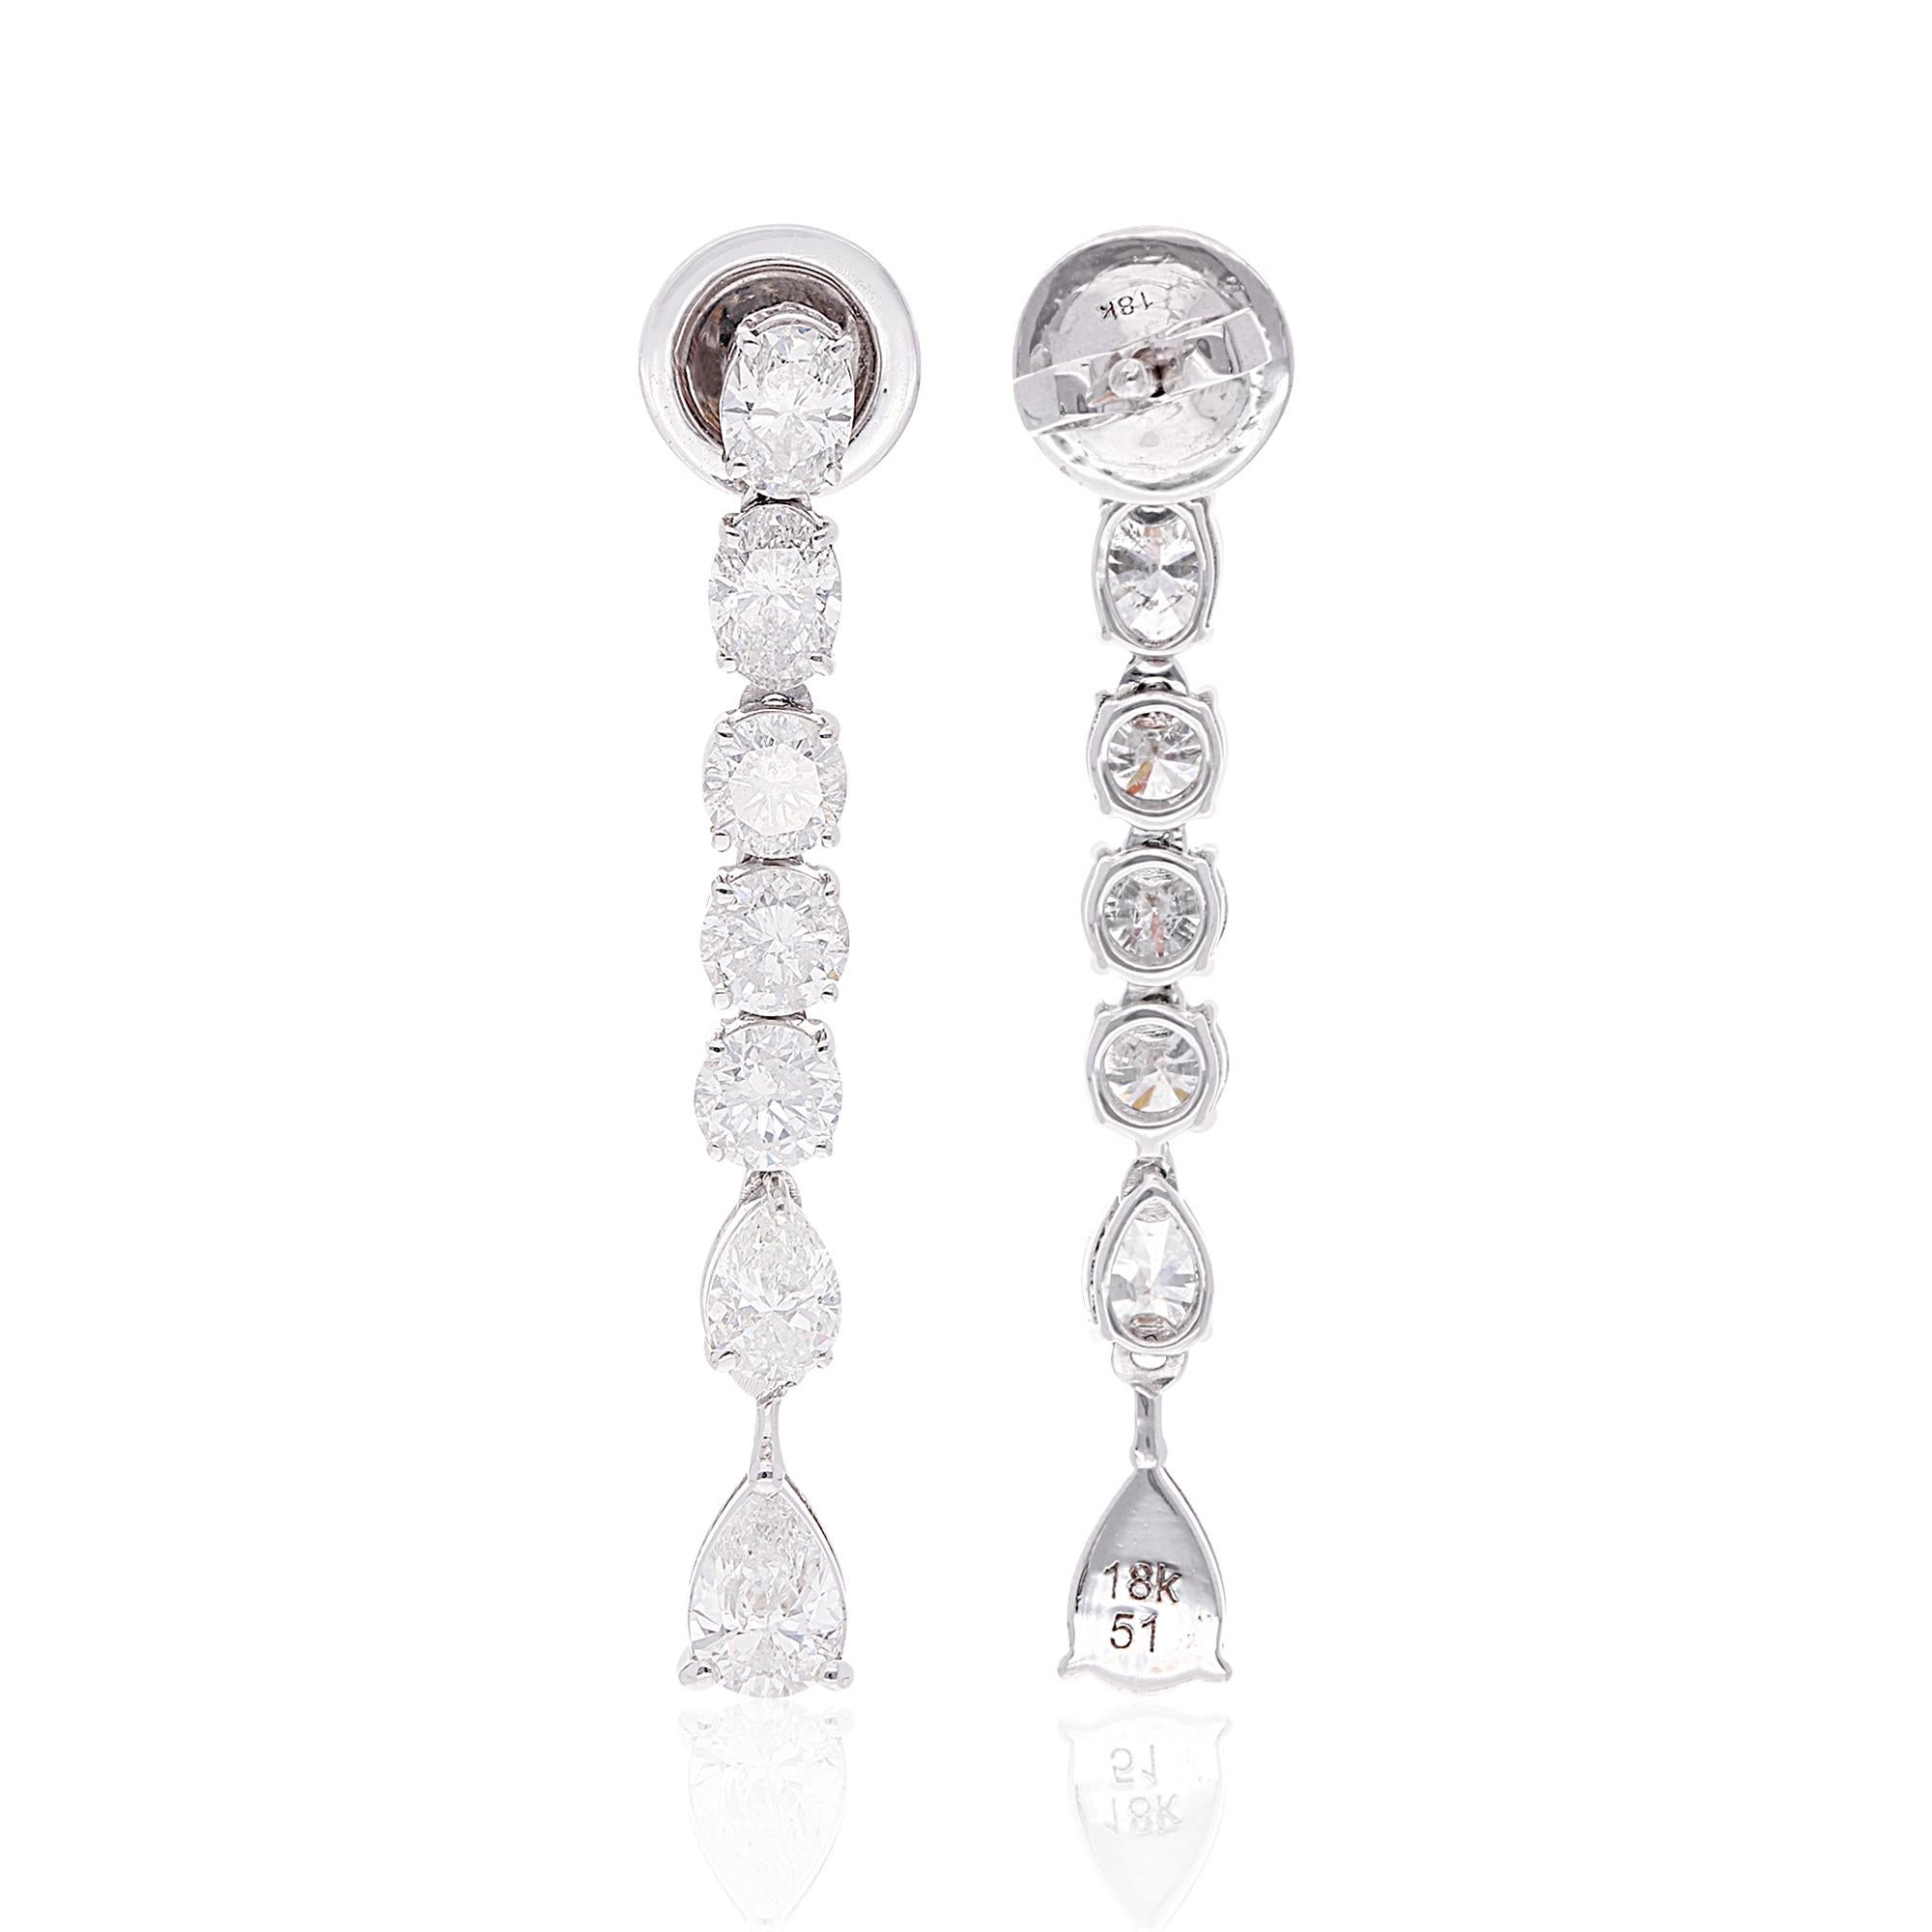 Make yourself trendy and stylish with this 14k White Gold Earrings glittering with Diamond that will add majestic charm and elegance to your look. Exquisitely designed, this Earrings will provide you a classy look.

✧✧Welcome To Our Shop Spectrum